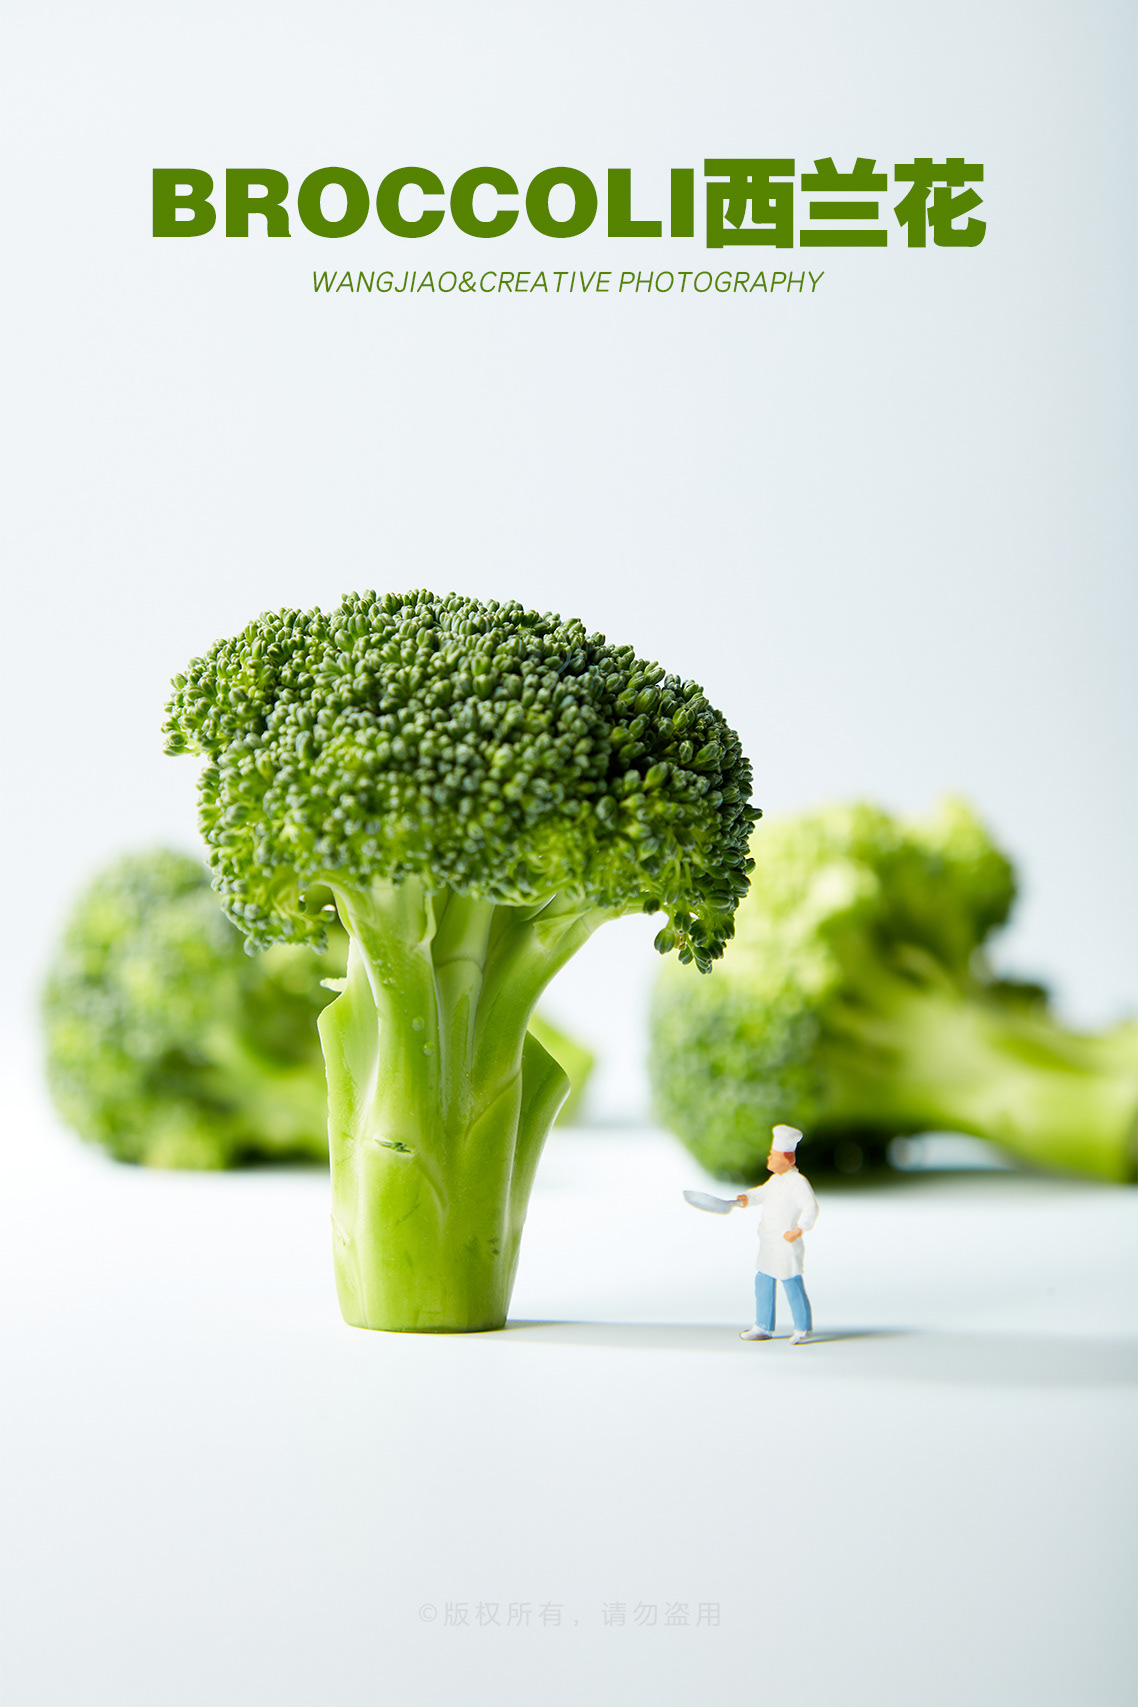 broccoli Creative Photography fruits and vegetables micro photography